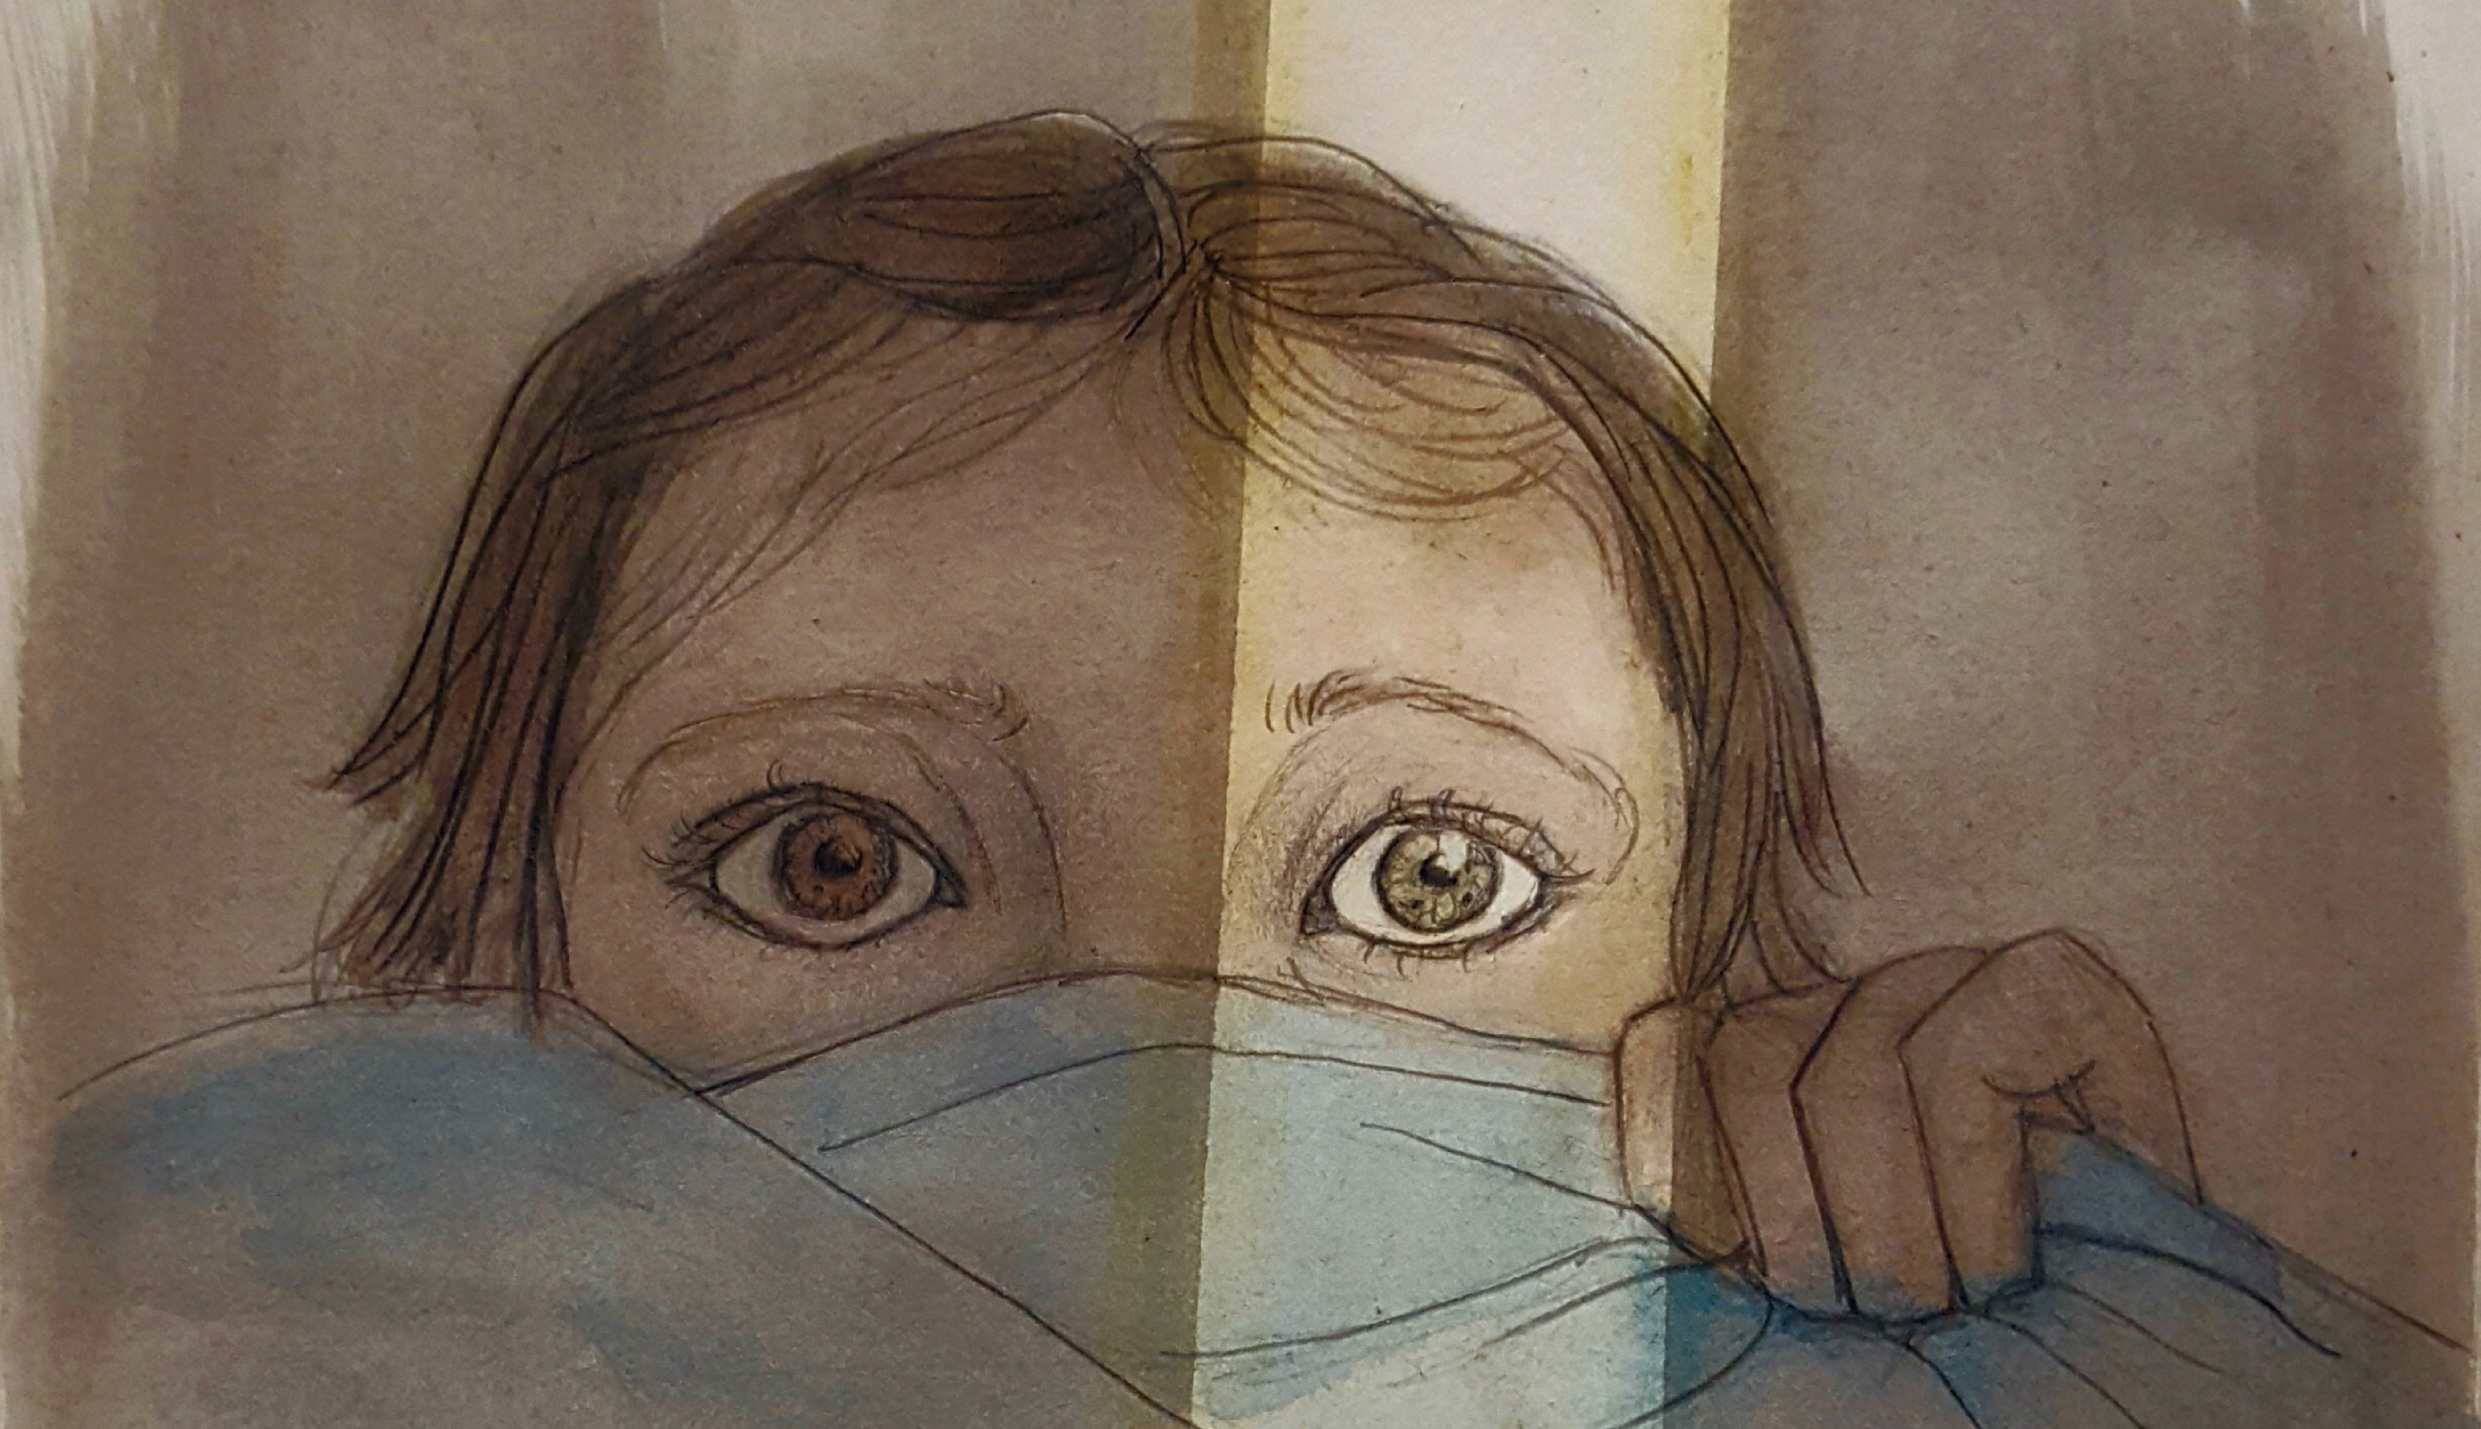 illustration young girl with blanket pulled up showing nervous eyes peeking out one eye is illuminated by a sliver of light and the rest is in shadow